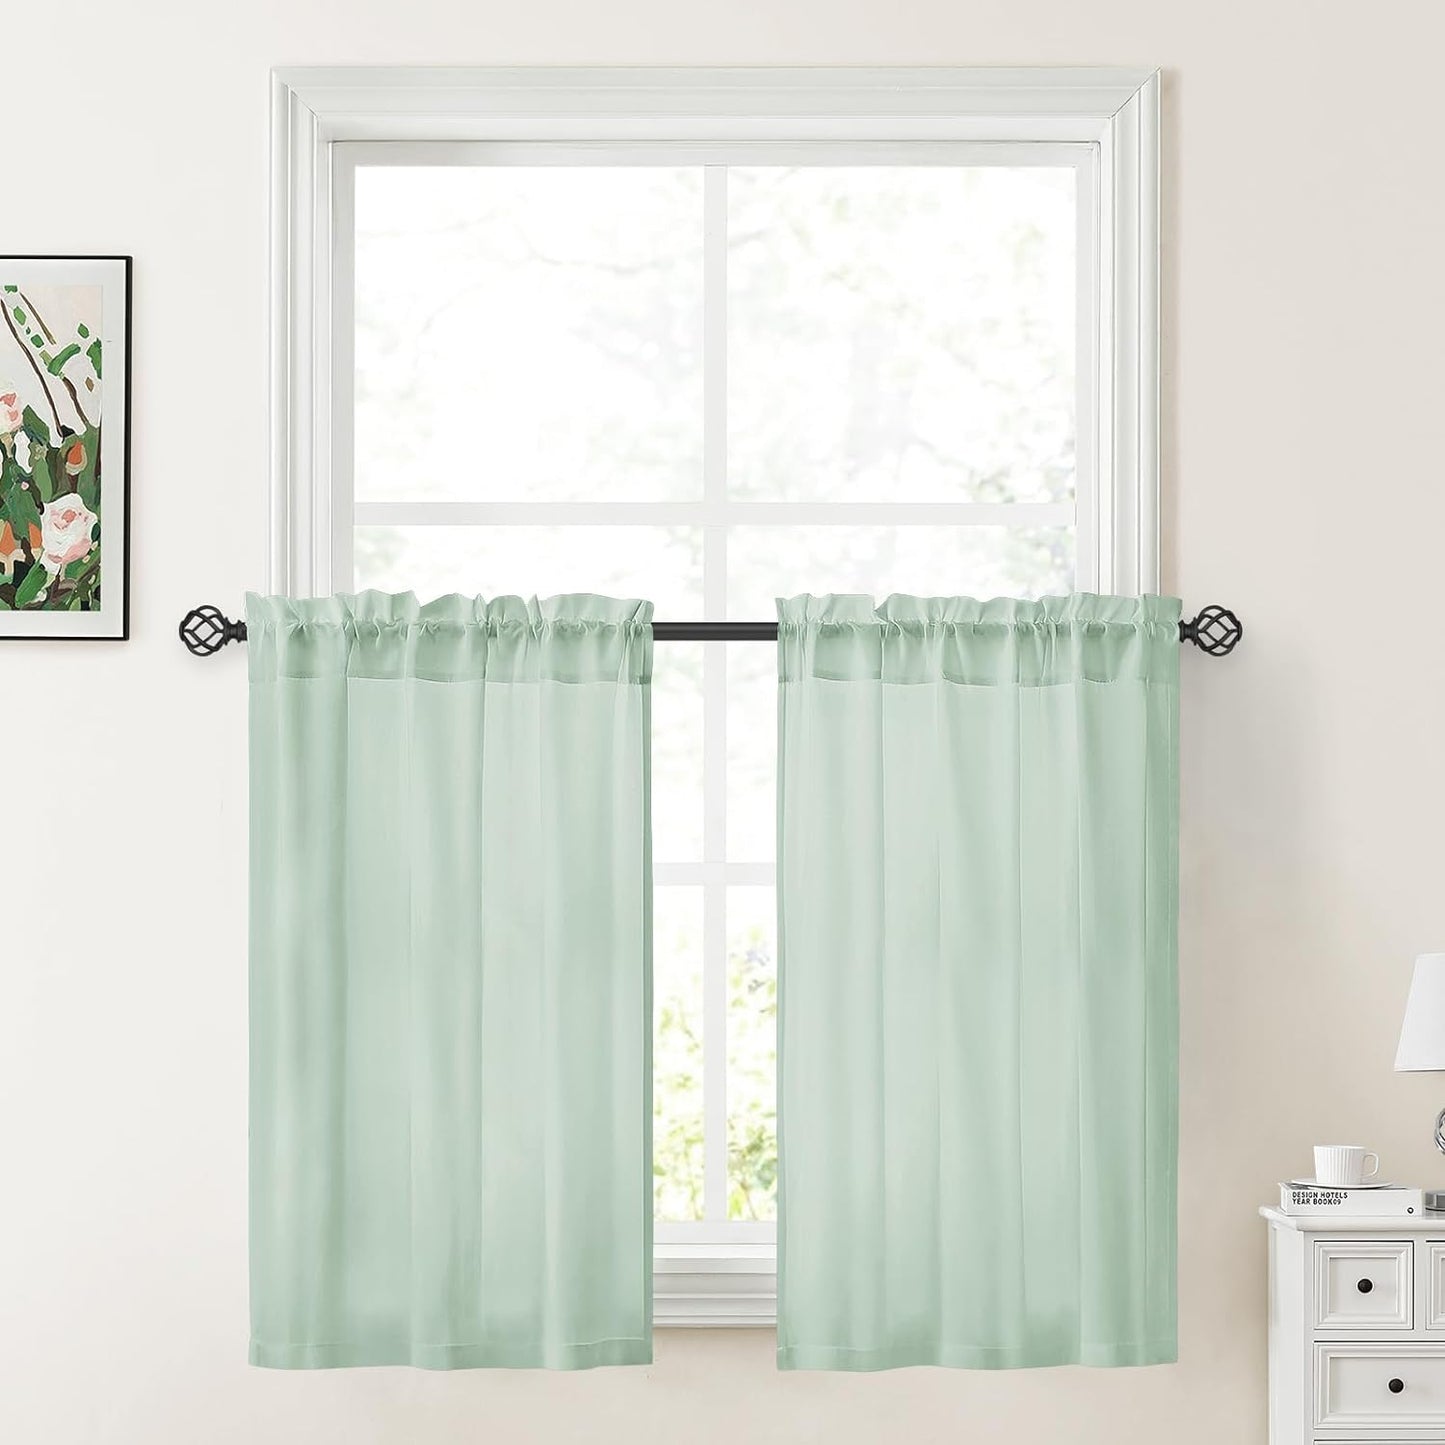 HOMEIDEAS Non-See-Through White Privacy Sheer Curtains 52 X 84 Inches Long 2 Panels Semi Sheer Curtains Light Filtering Window Curtains Drapes for Bedroom Living Room  HOMEIDEAS Sage Green W30" X L36" 